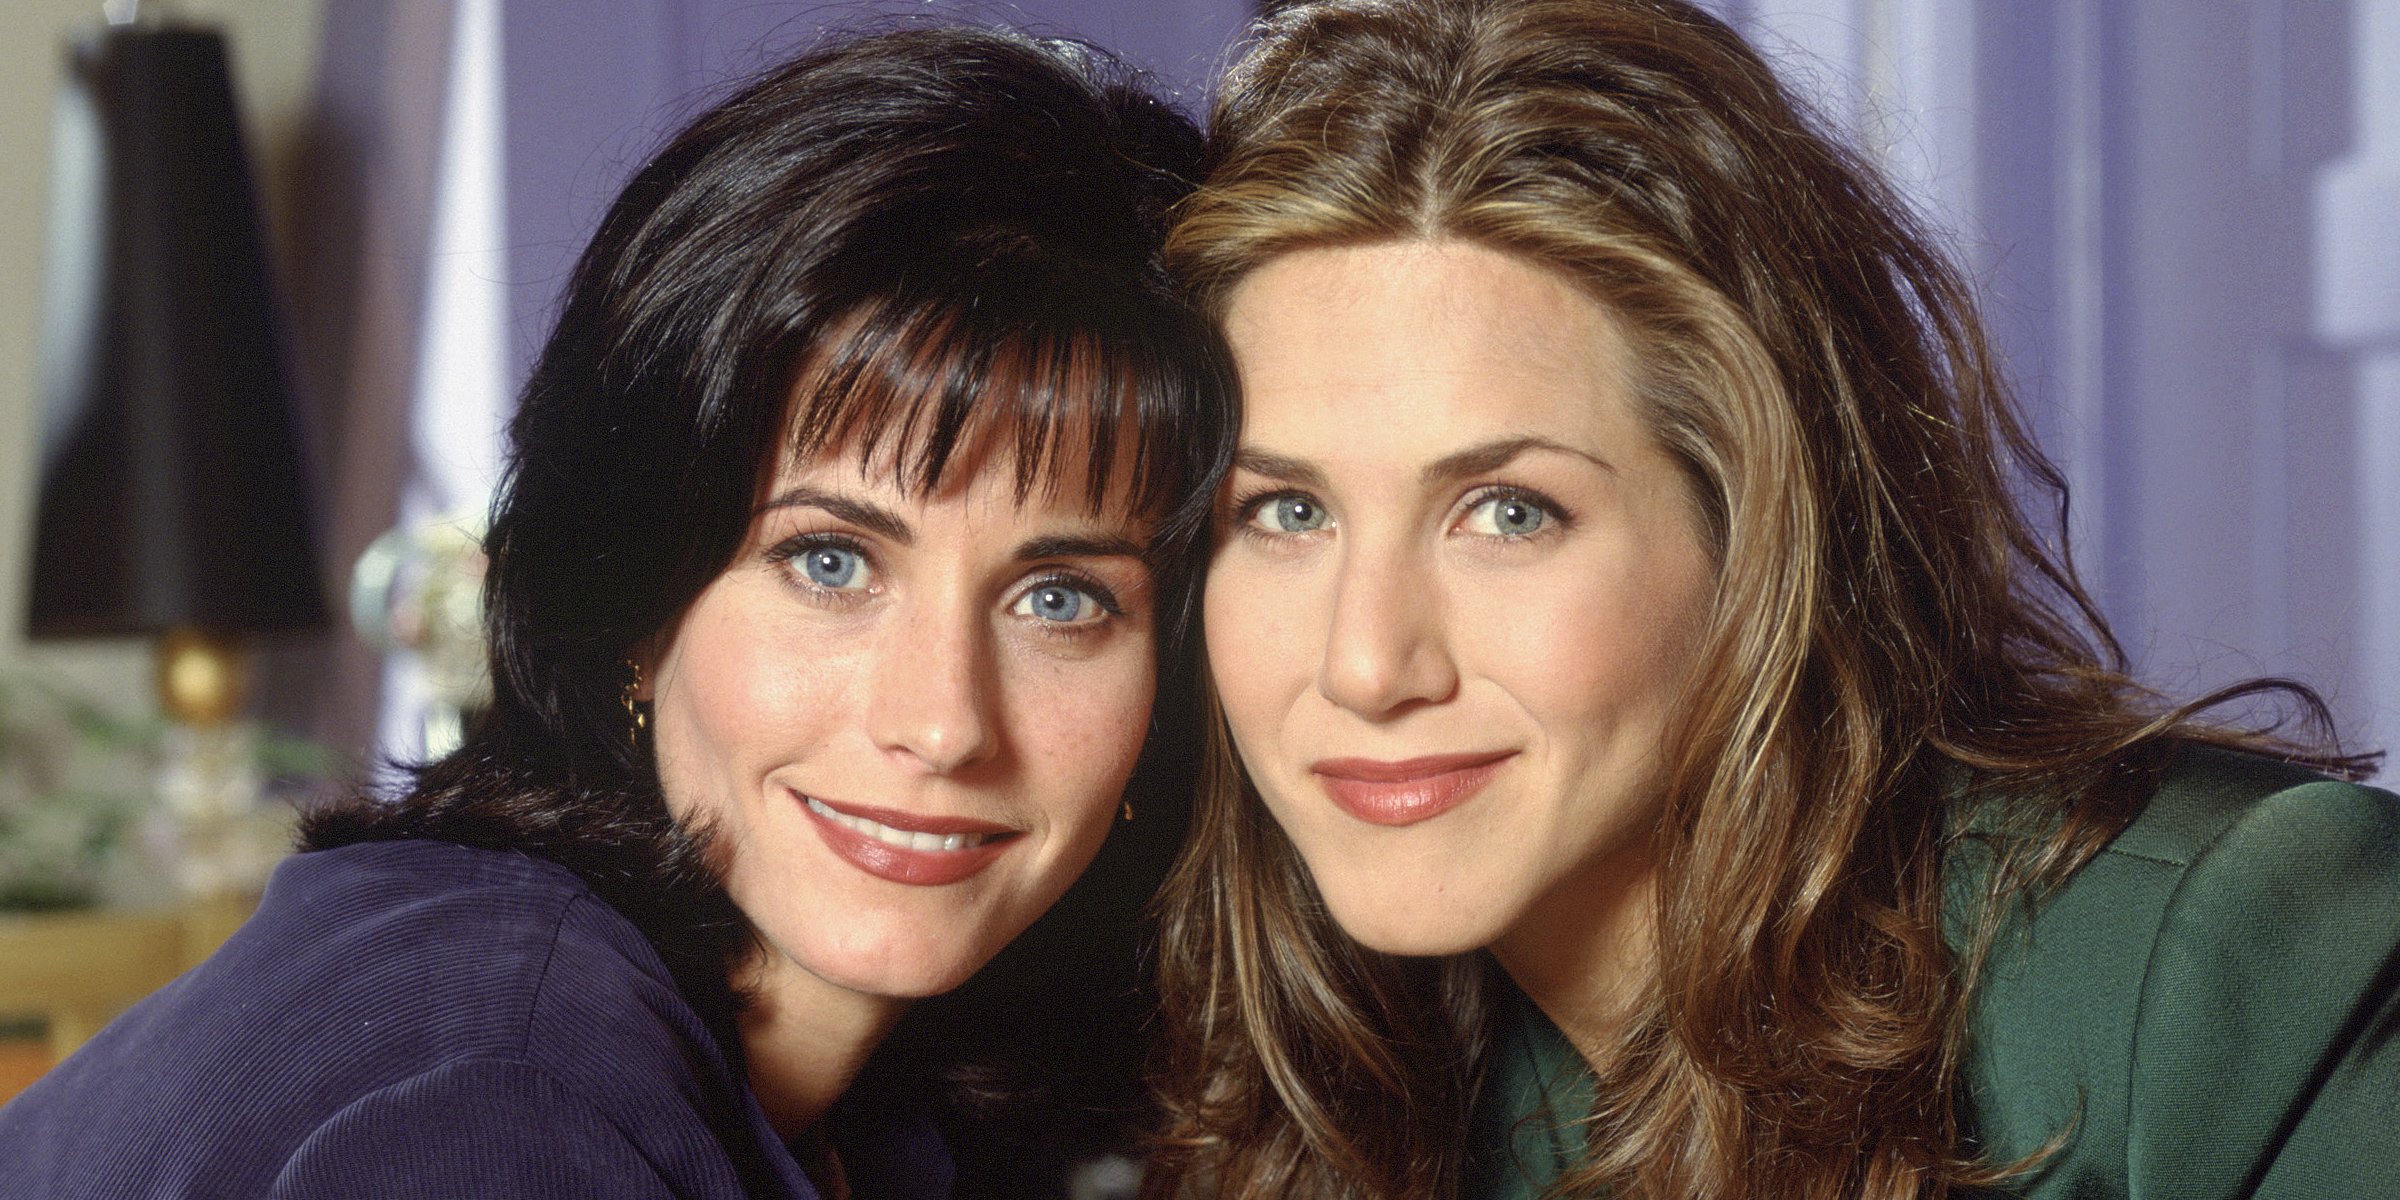 Courteney Cox and Jennifer Aniston ┃Source: Getty Images